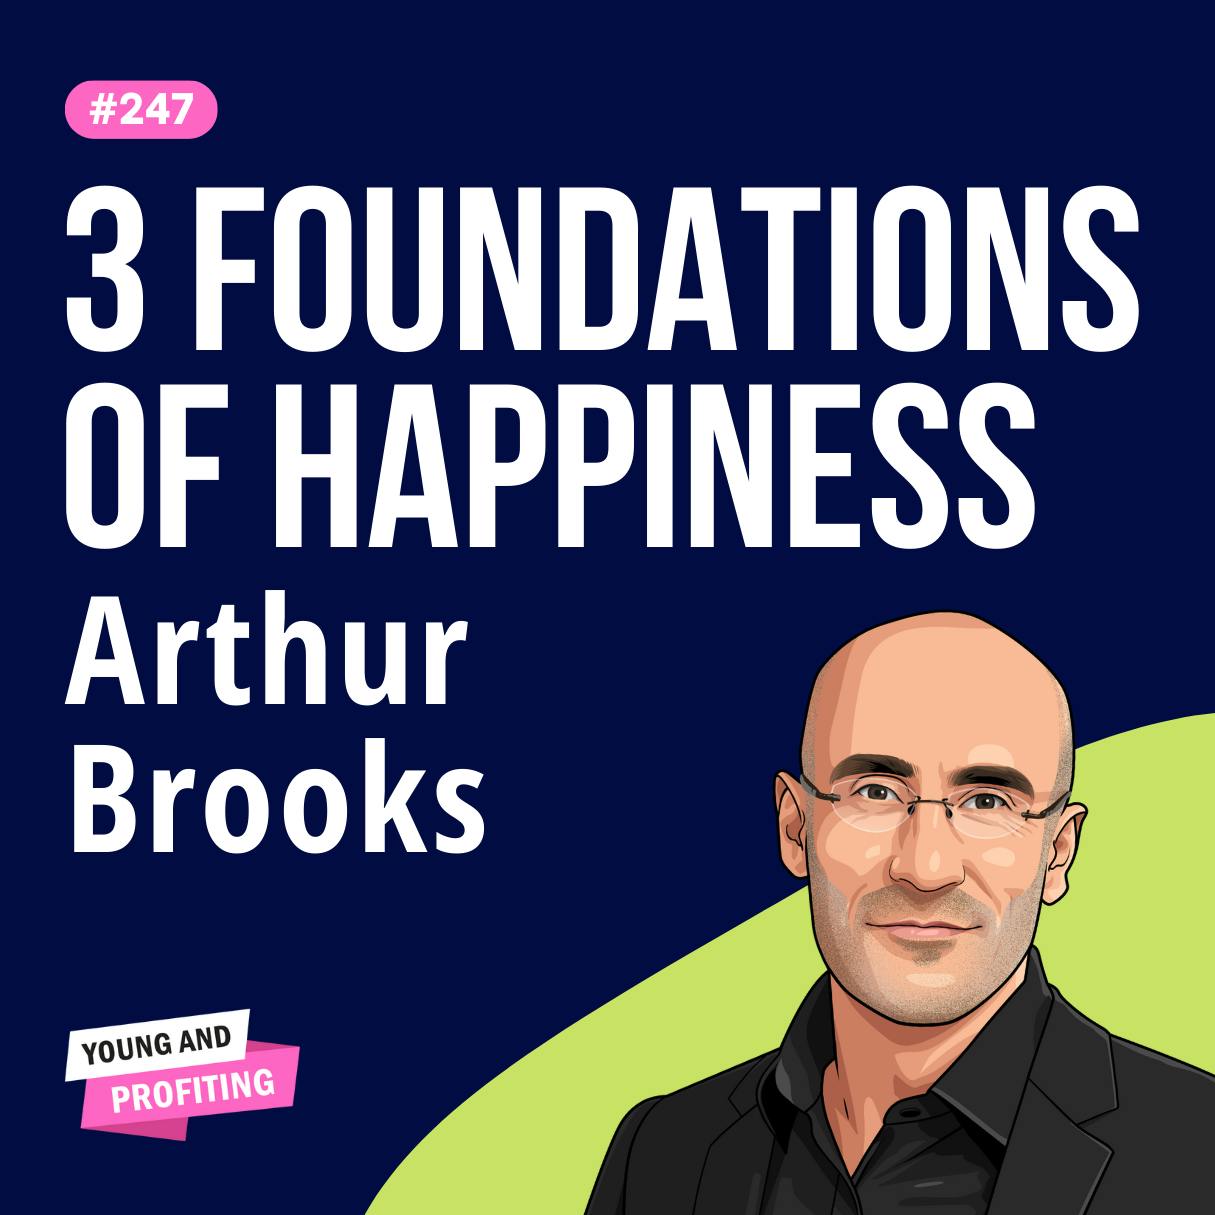 Arthur Brooks: The Science of Happiness, How to Build the Life You Want | E247 by Hala Taha | YAP Media Network